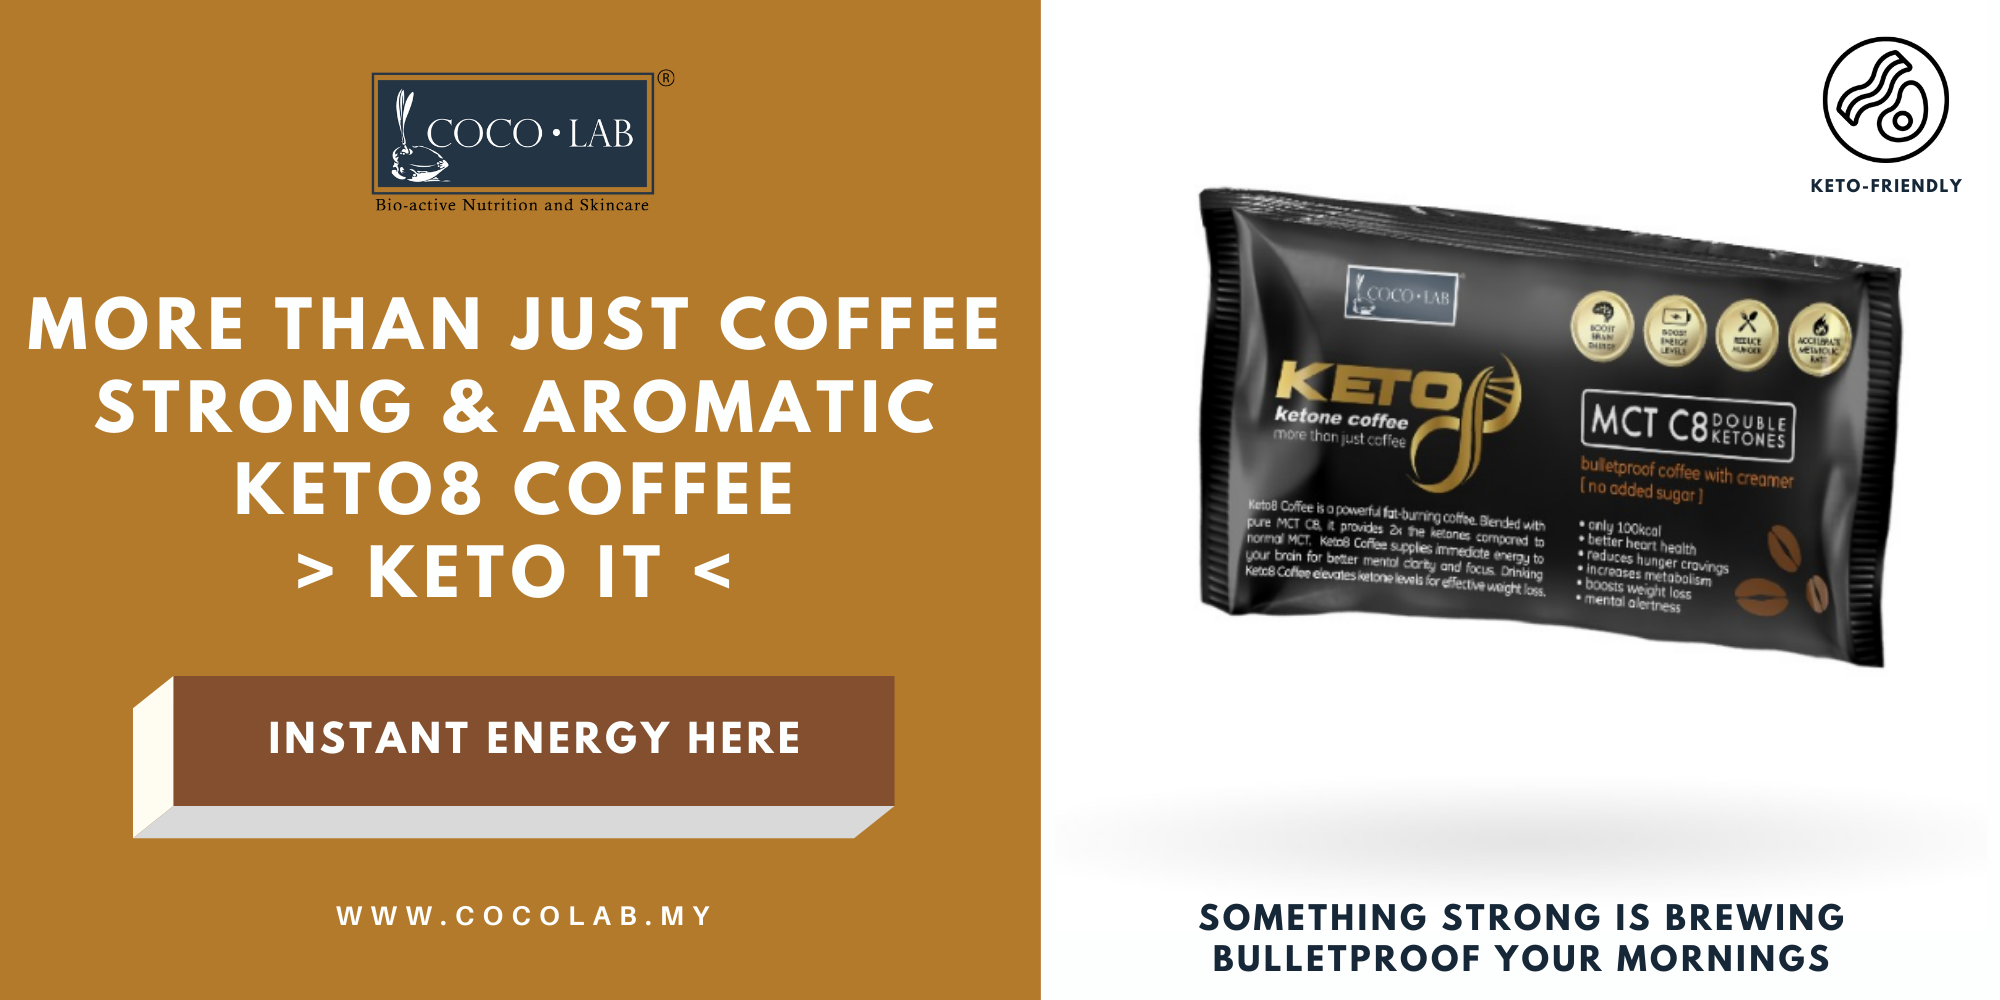 Keto8 Coffee - Sip on something strong today